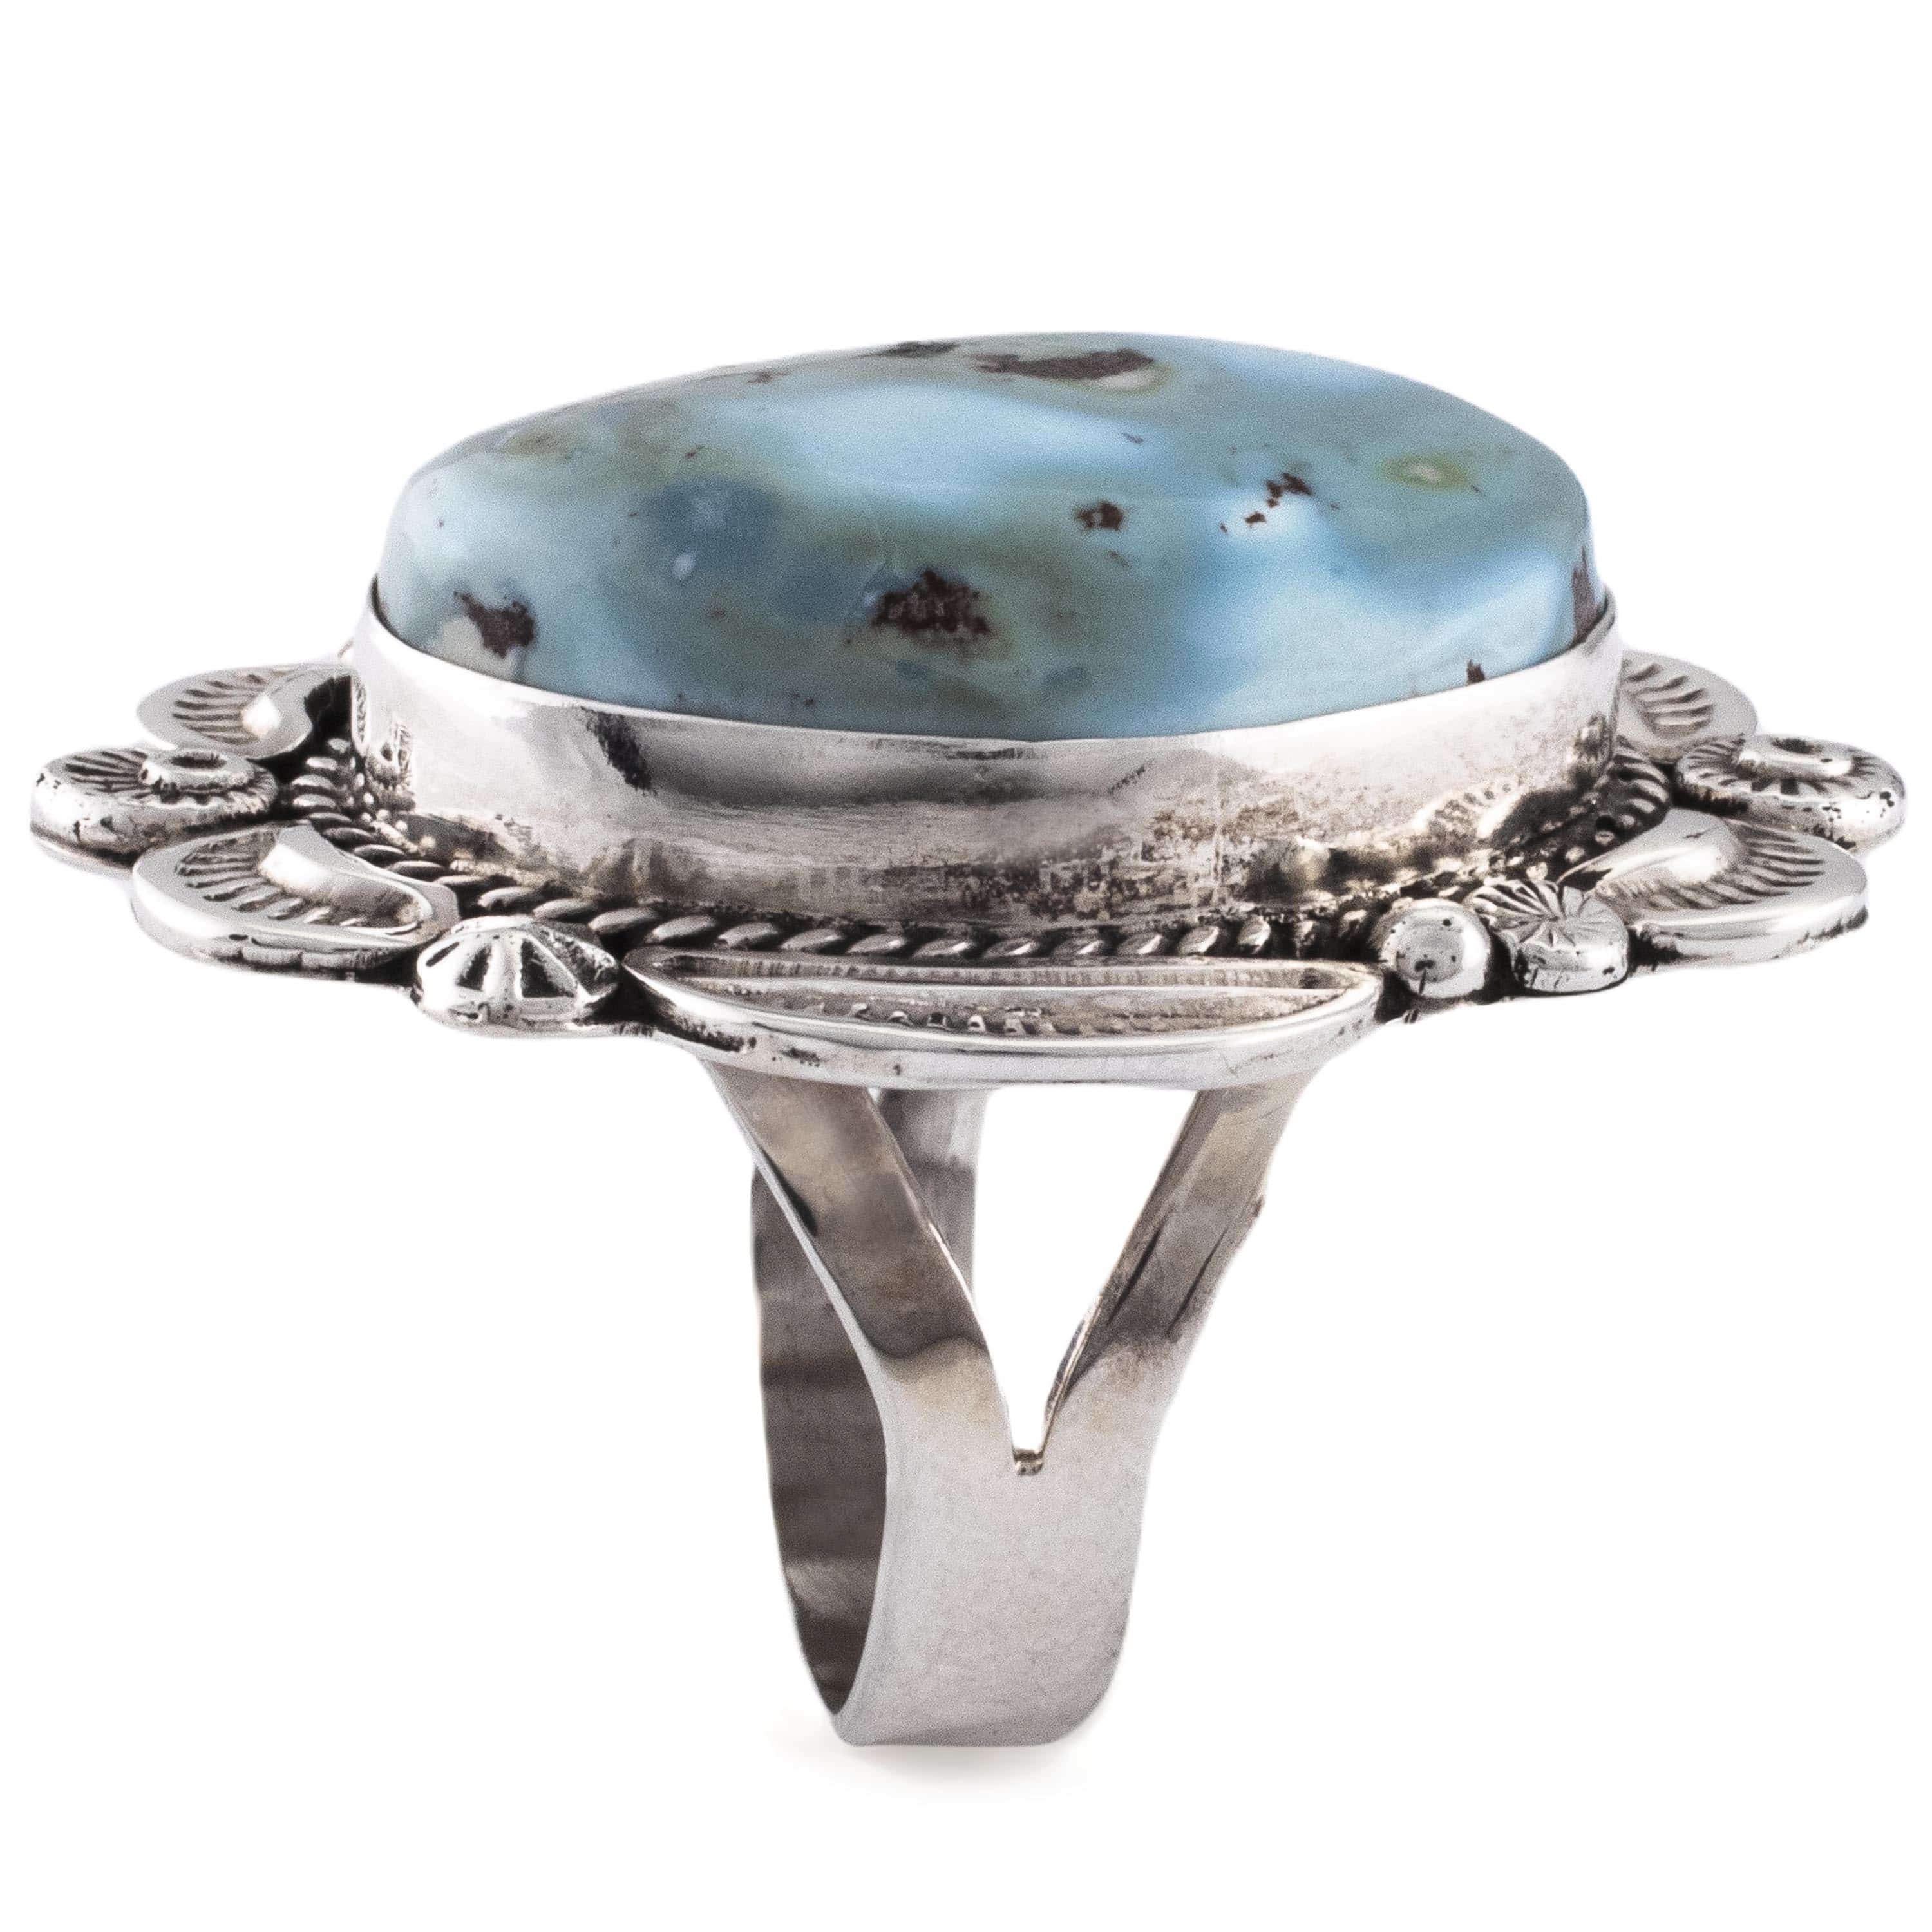 Kalifano Native American Jewelry 7.5 E.M. Linkin Golden Hills Turquoise USA Native American Made 925 Sterling Silver Ring NAR1100.004.75